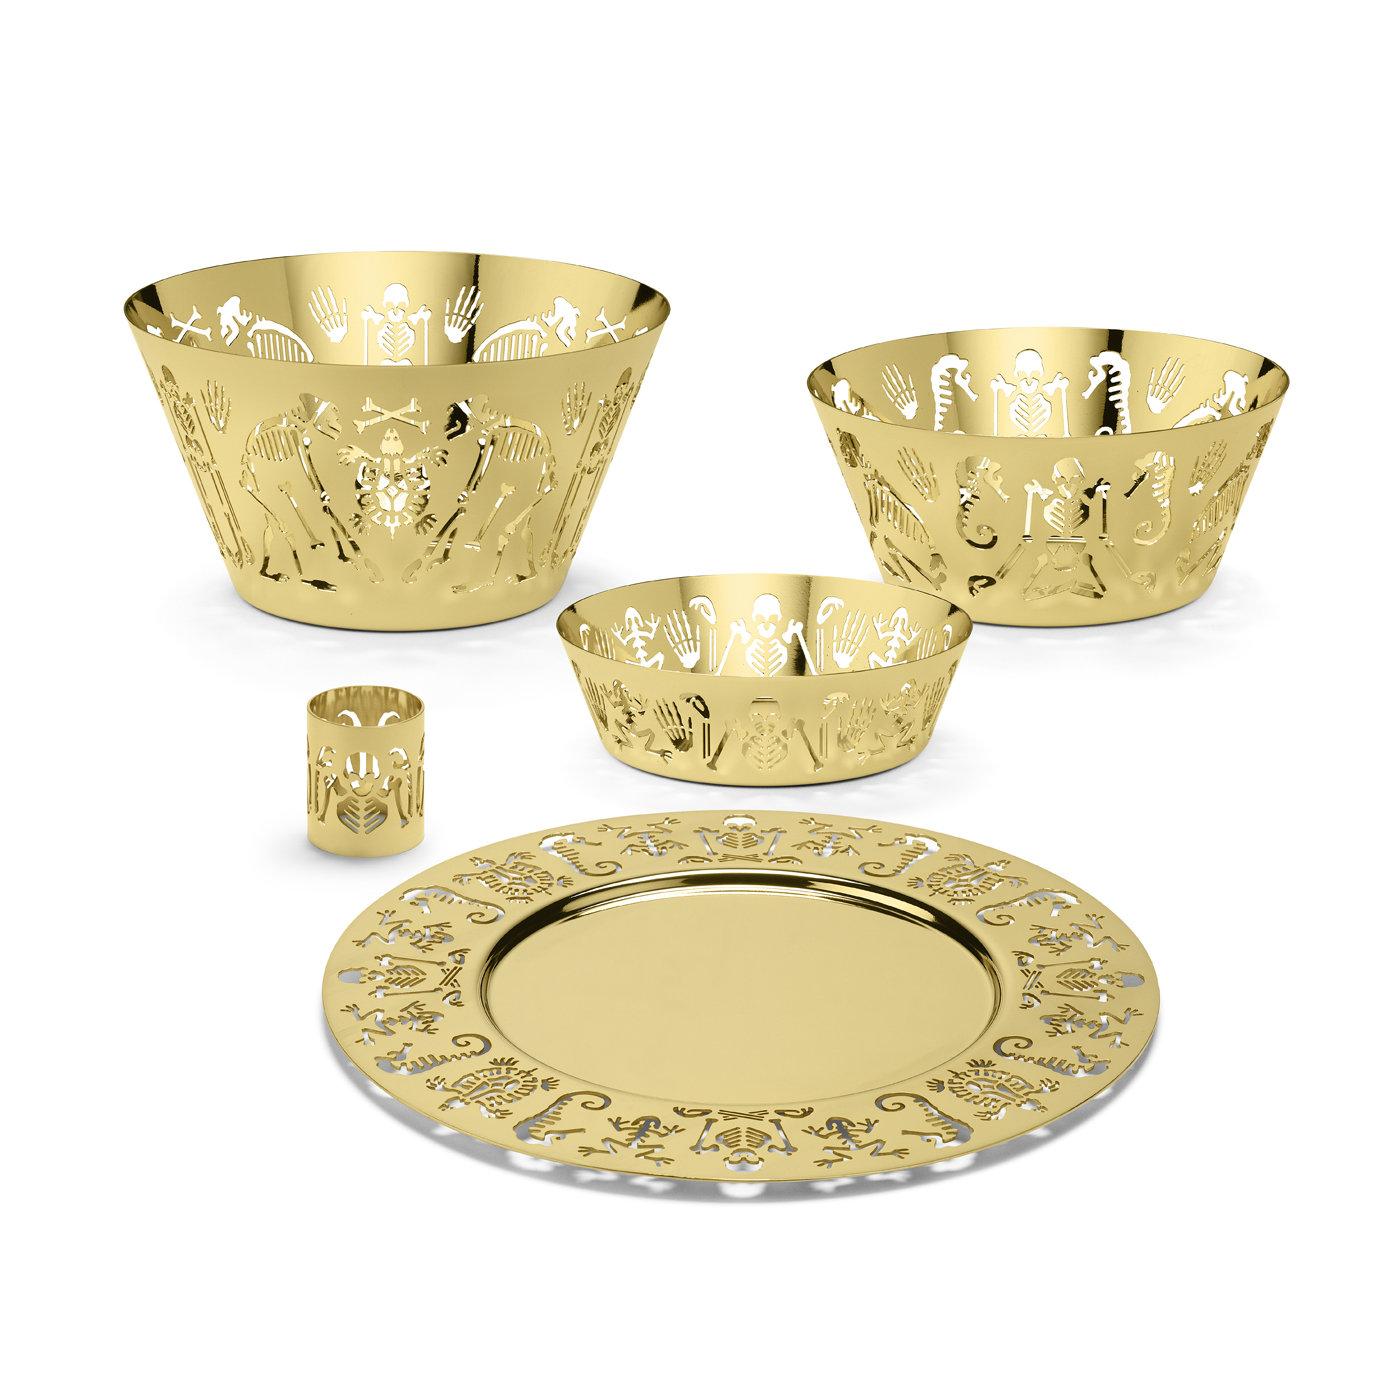 This large bowl is a superb object of functional decor that will elegantly serve food at a modern table while adding a unique and mesmerizing decorative accent. Entirely made of brass, the bowl's conical shape boasts a cut-out garland of human, ape,